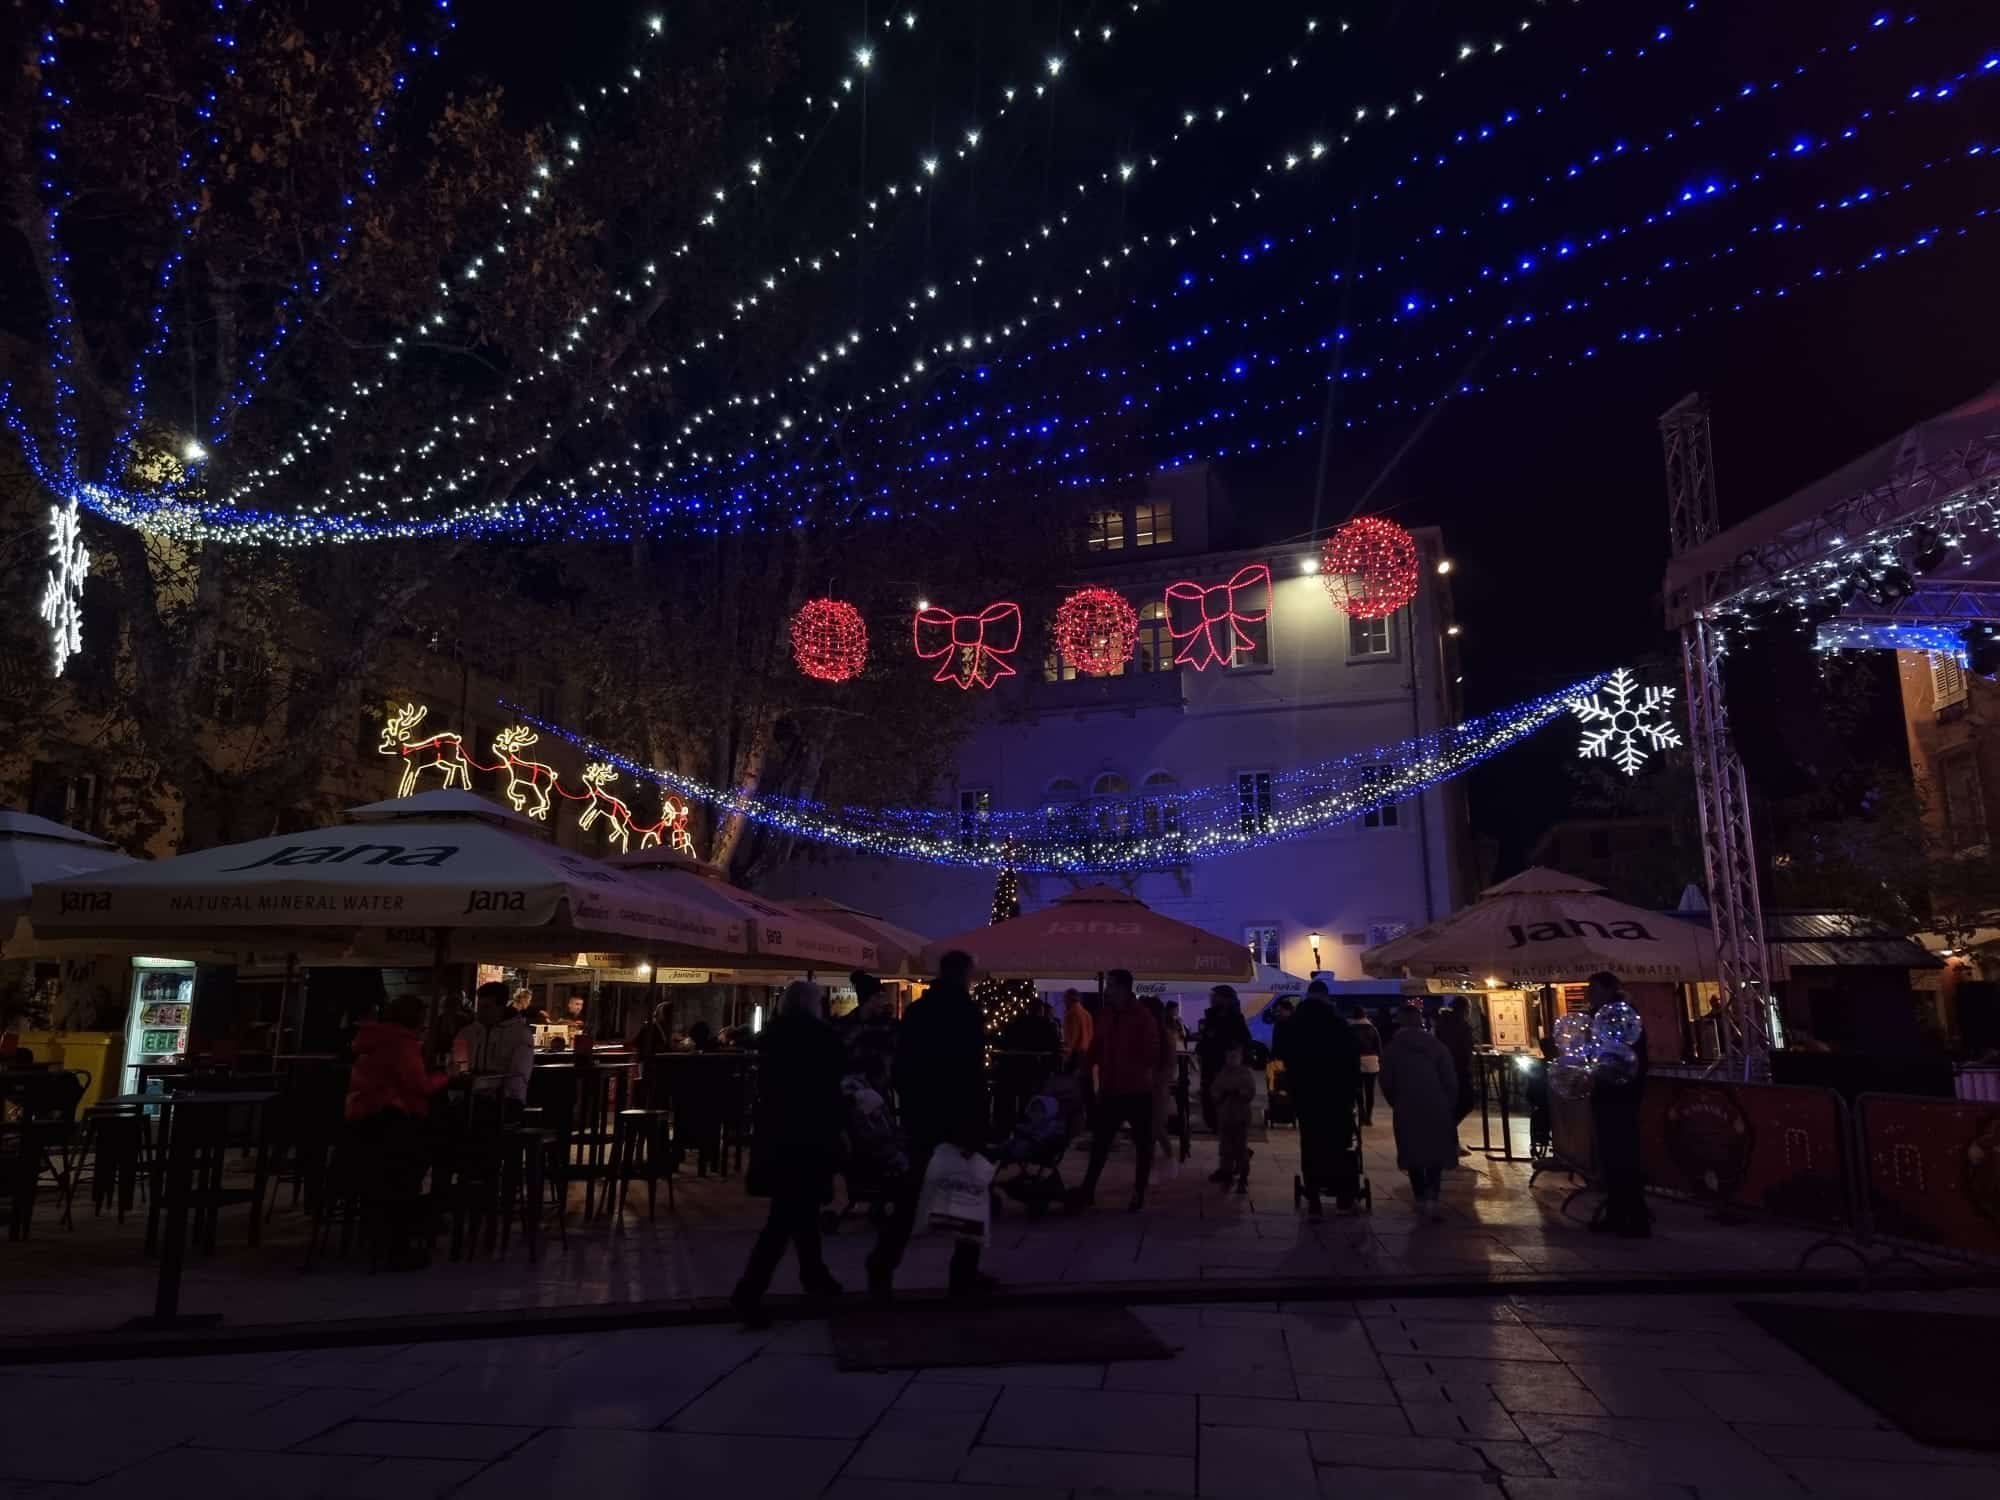 Experience the enchantment of advent in Zadar, where a Christmas market awaits you with shimmering blue lights.